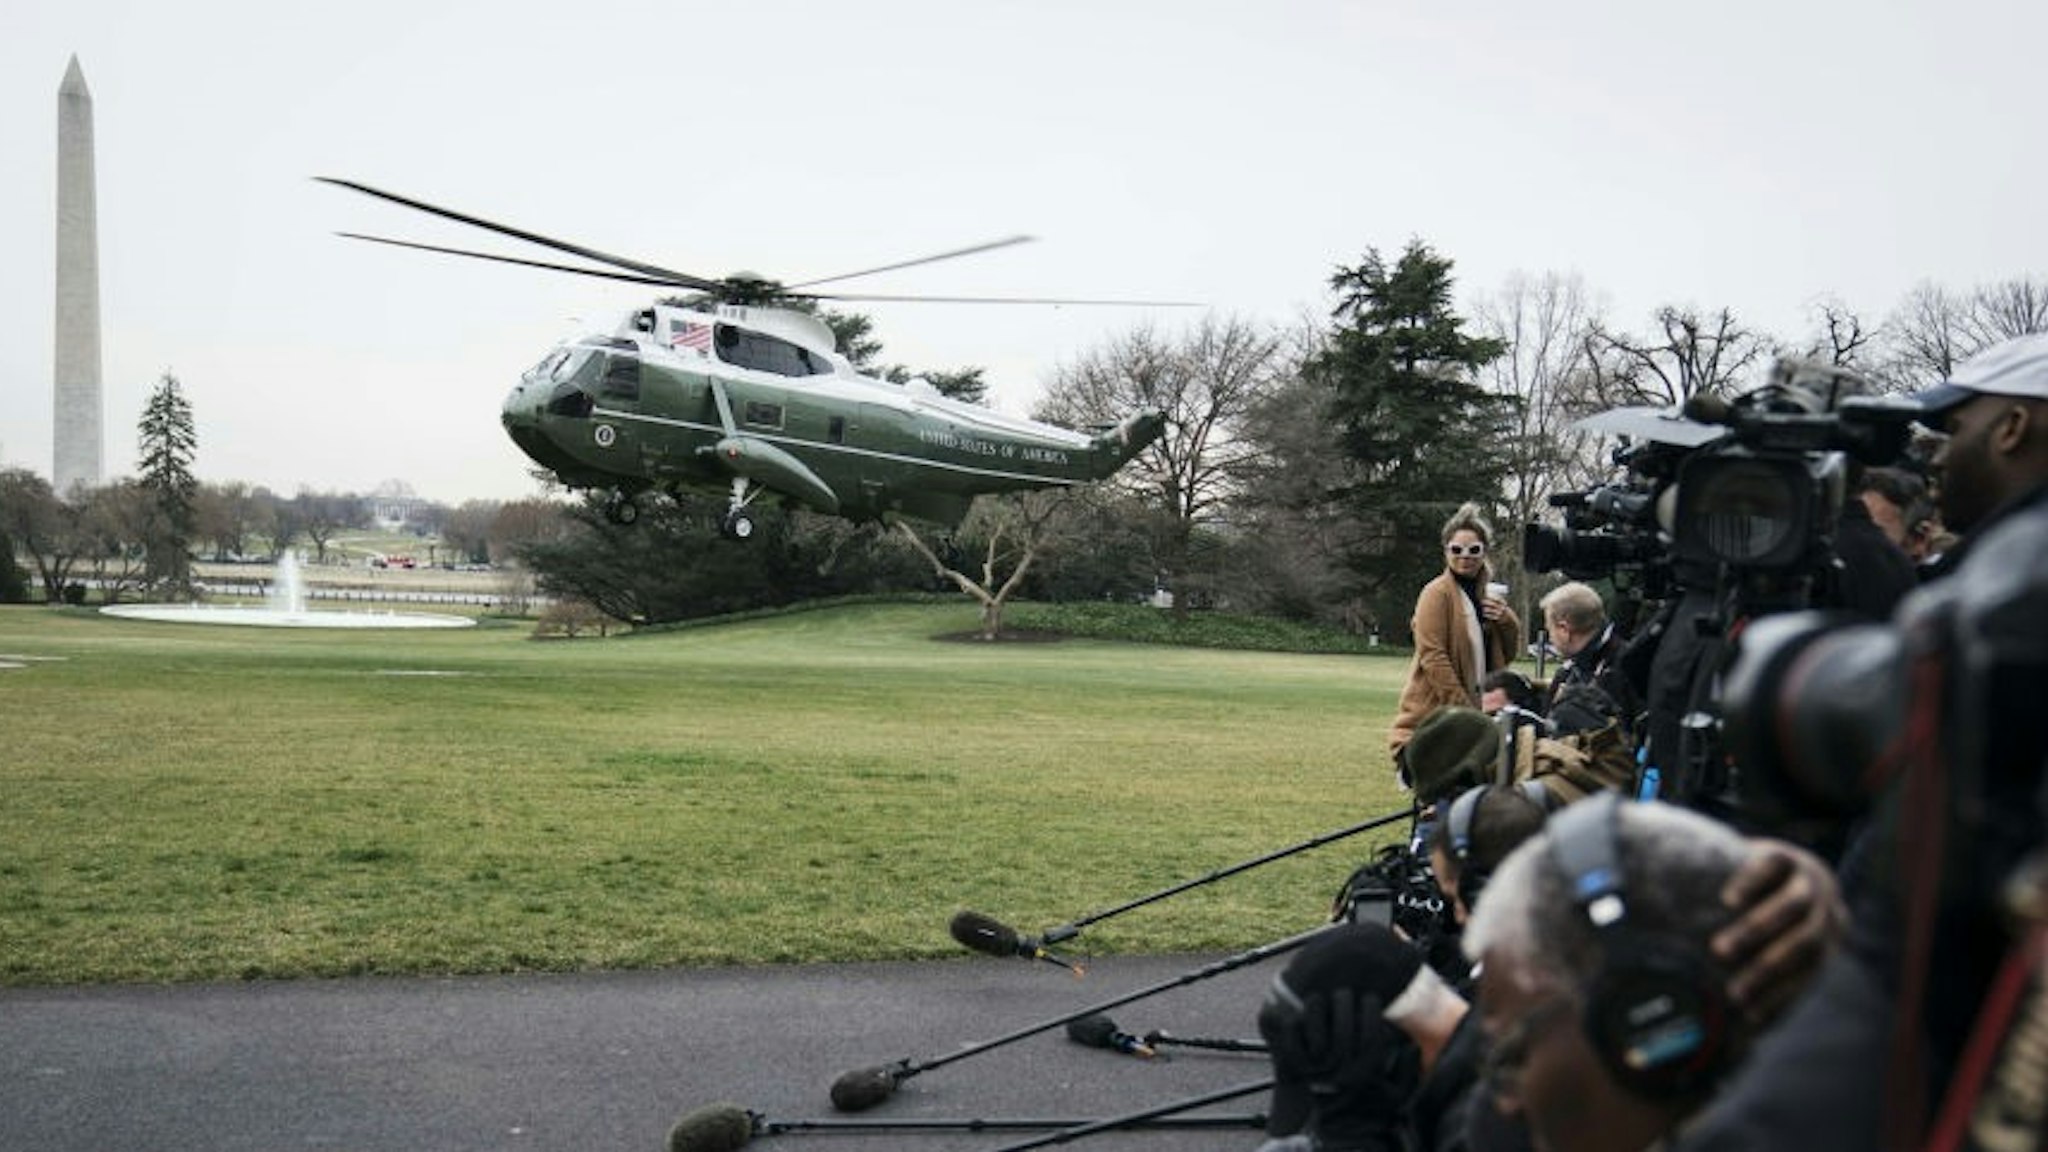 Marine One arrives on the South Lawn of the White House in Washington, D.C., U.S., on Friday, March 6, 2020. President Donald Trump is traveling to Tennessee after the central part of the state was hit by tornadoes that killed at least 19 people. Photographer: